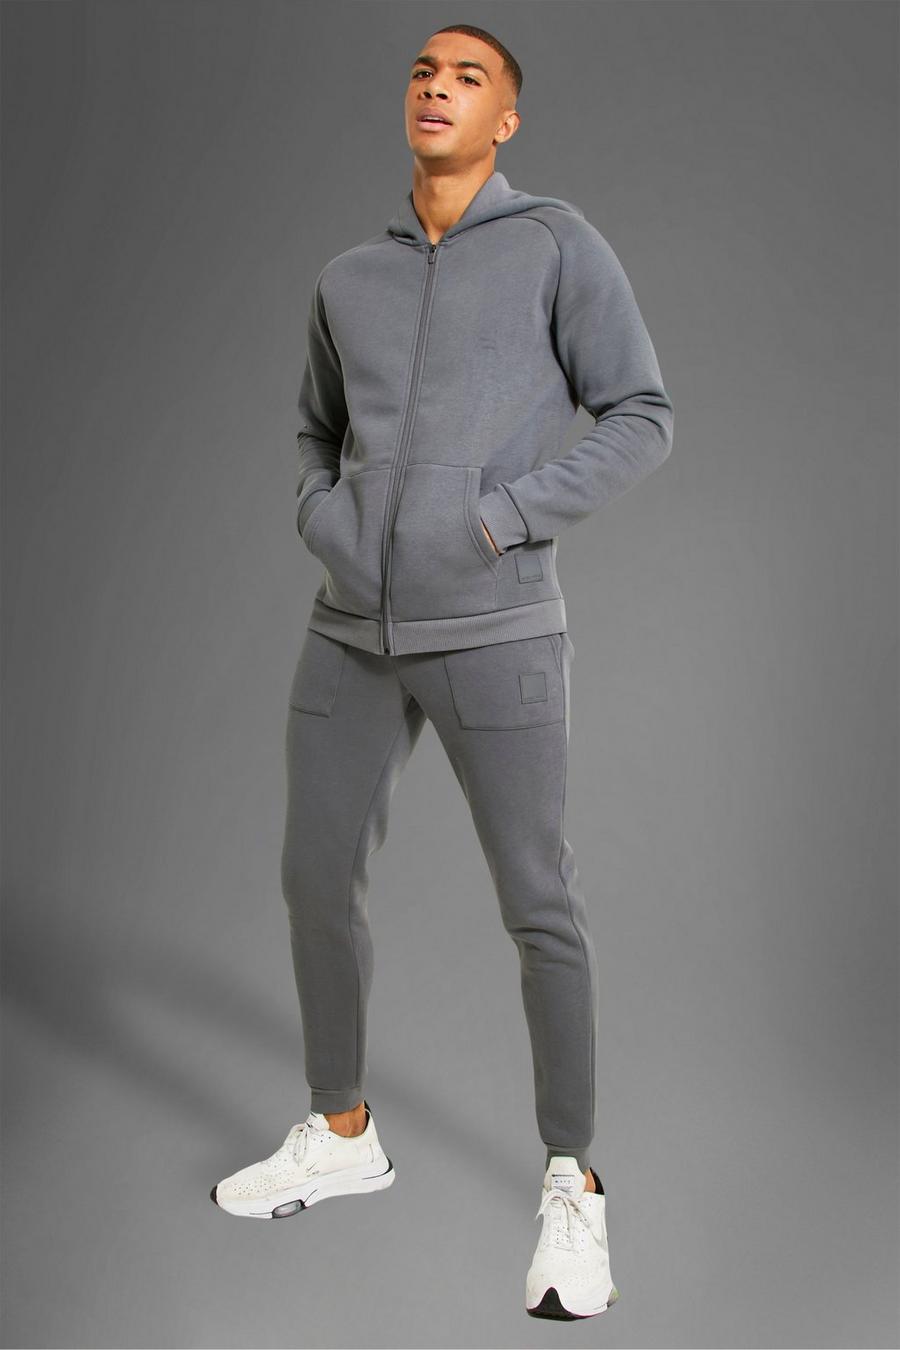 Charcoal grey Man Active Gym Training Hoodie Tracksuit